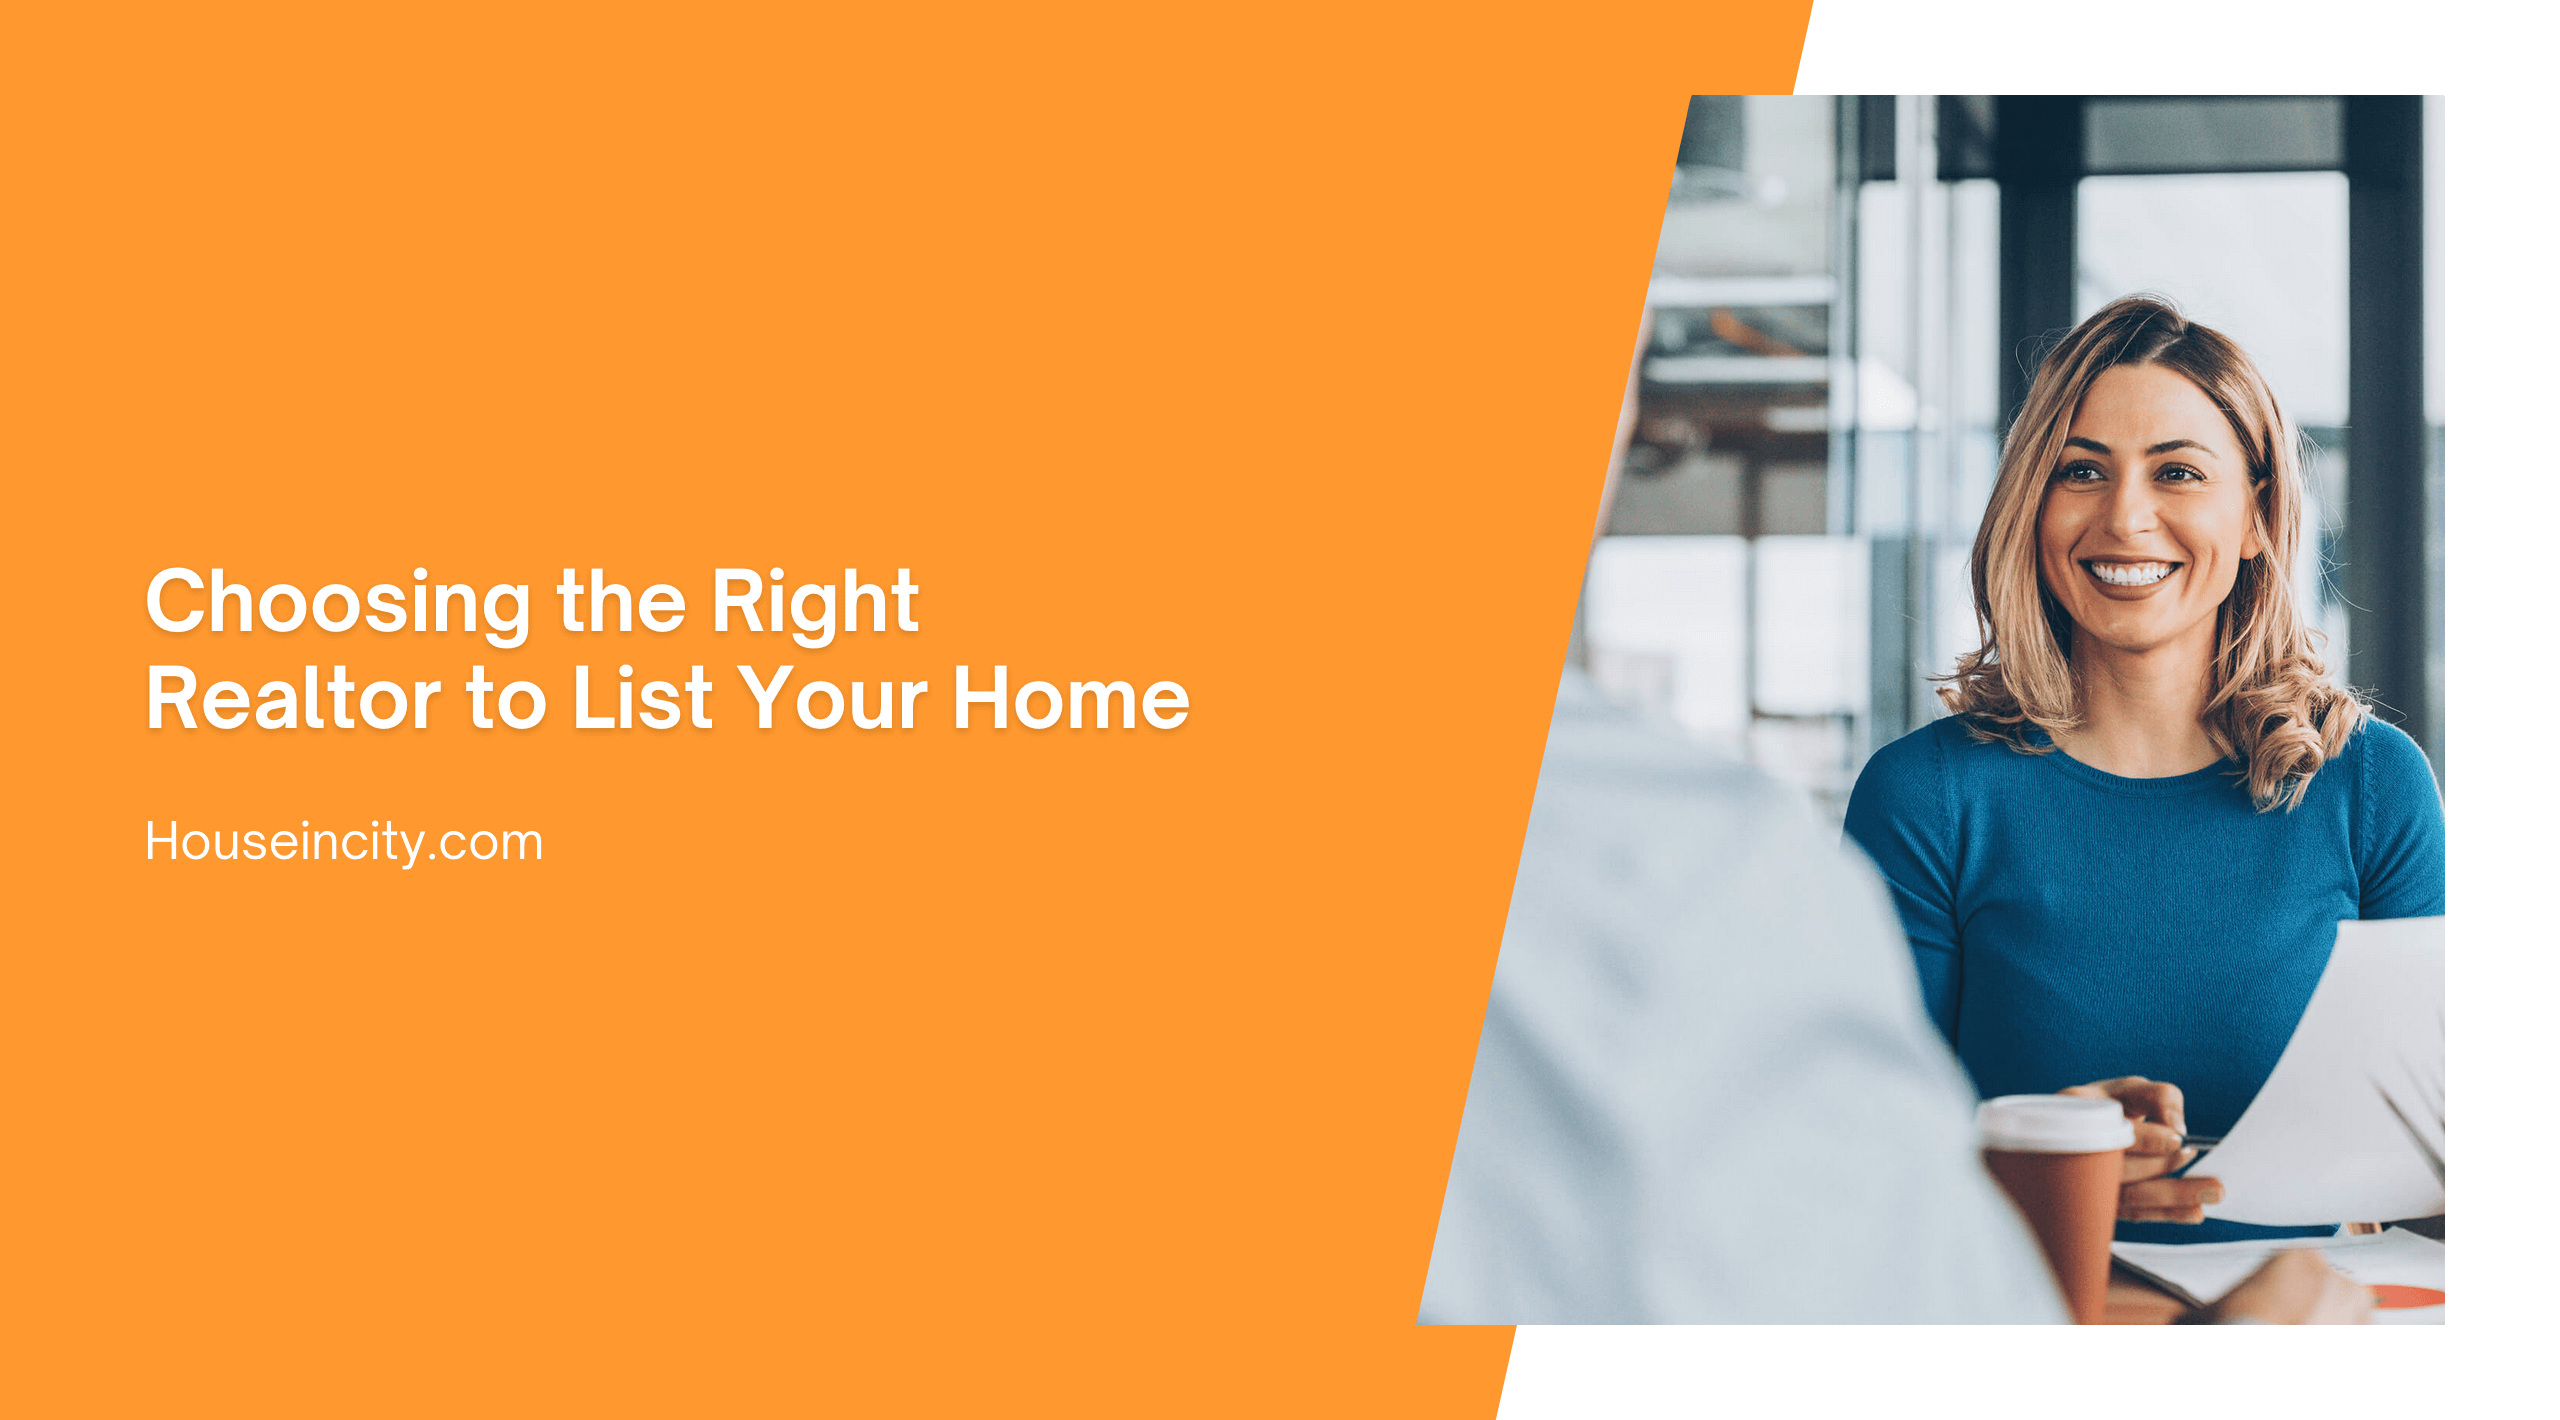 Choosing the Right Realtor to List Your Home